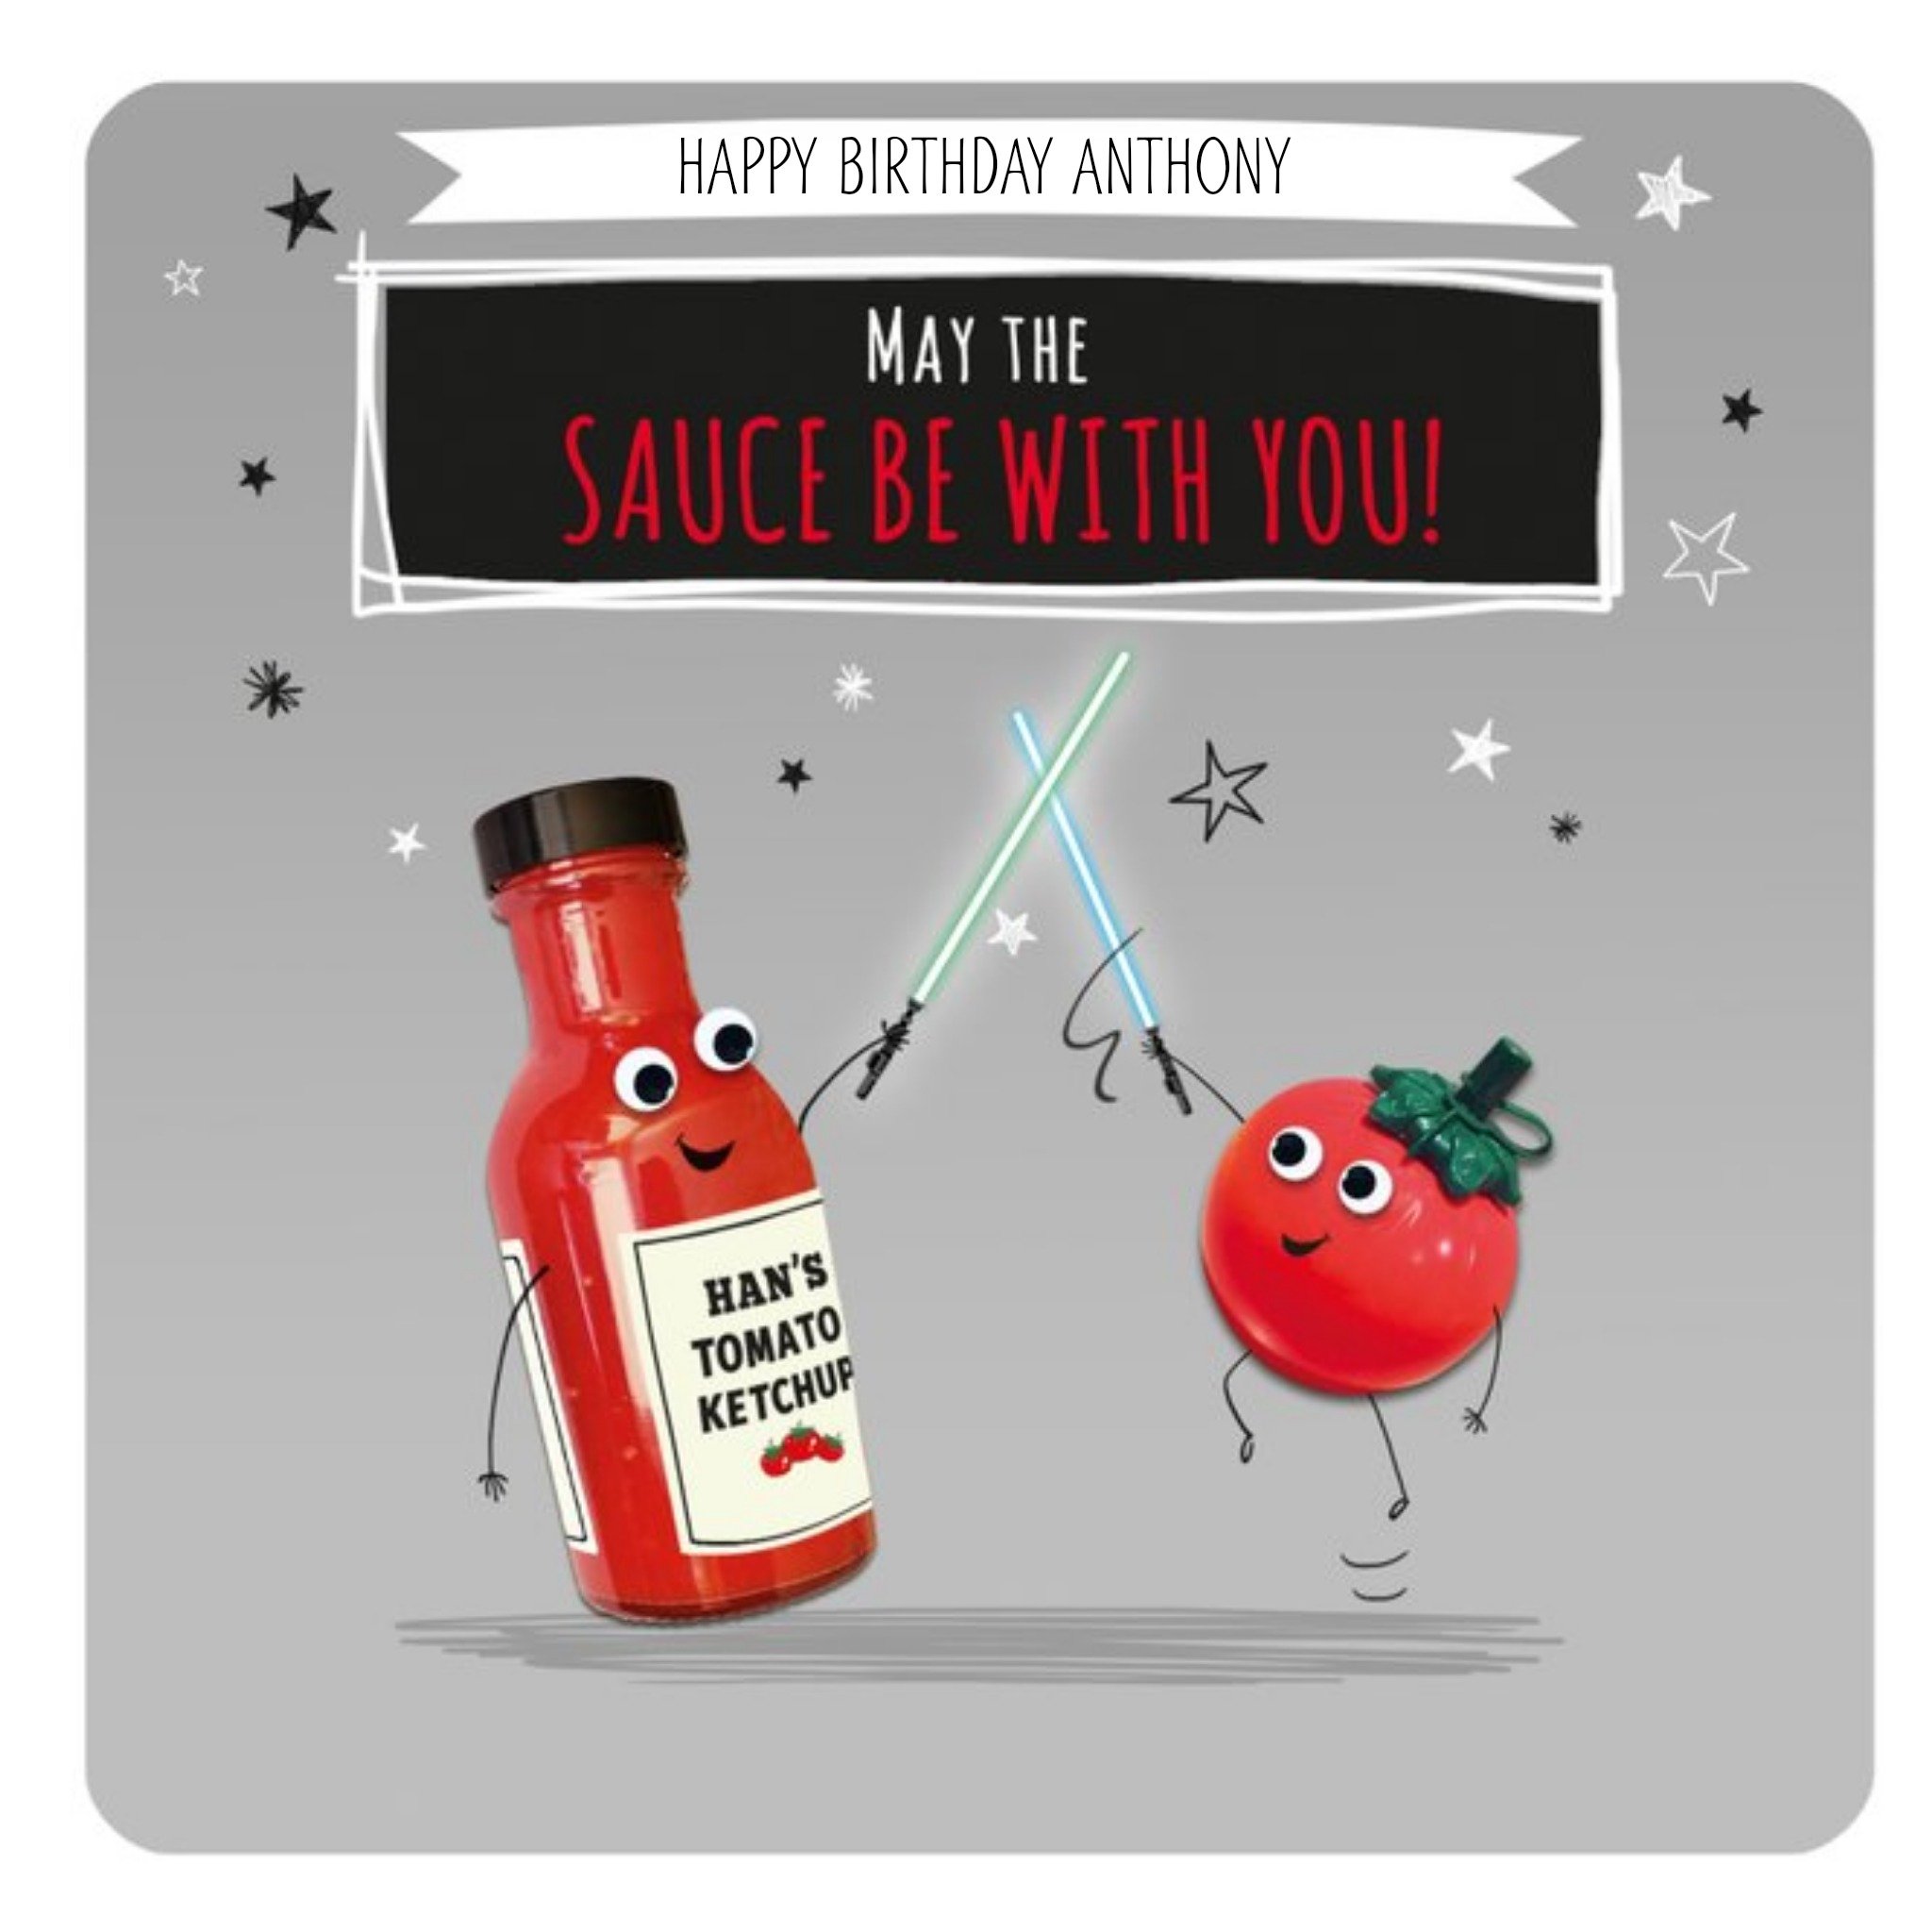 Moonpig Tomato Ketchup May The Sauce Be With You Personalised Card, Large